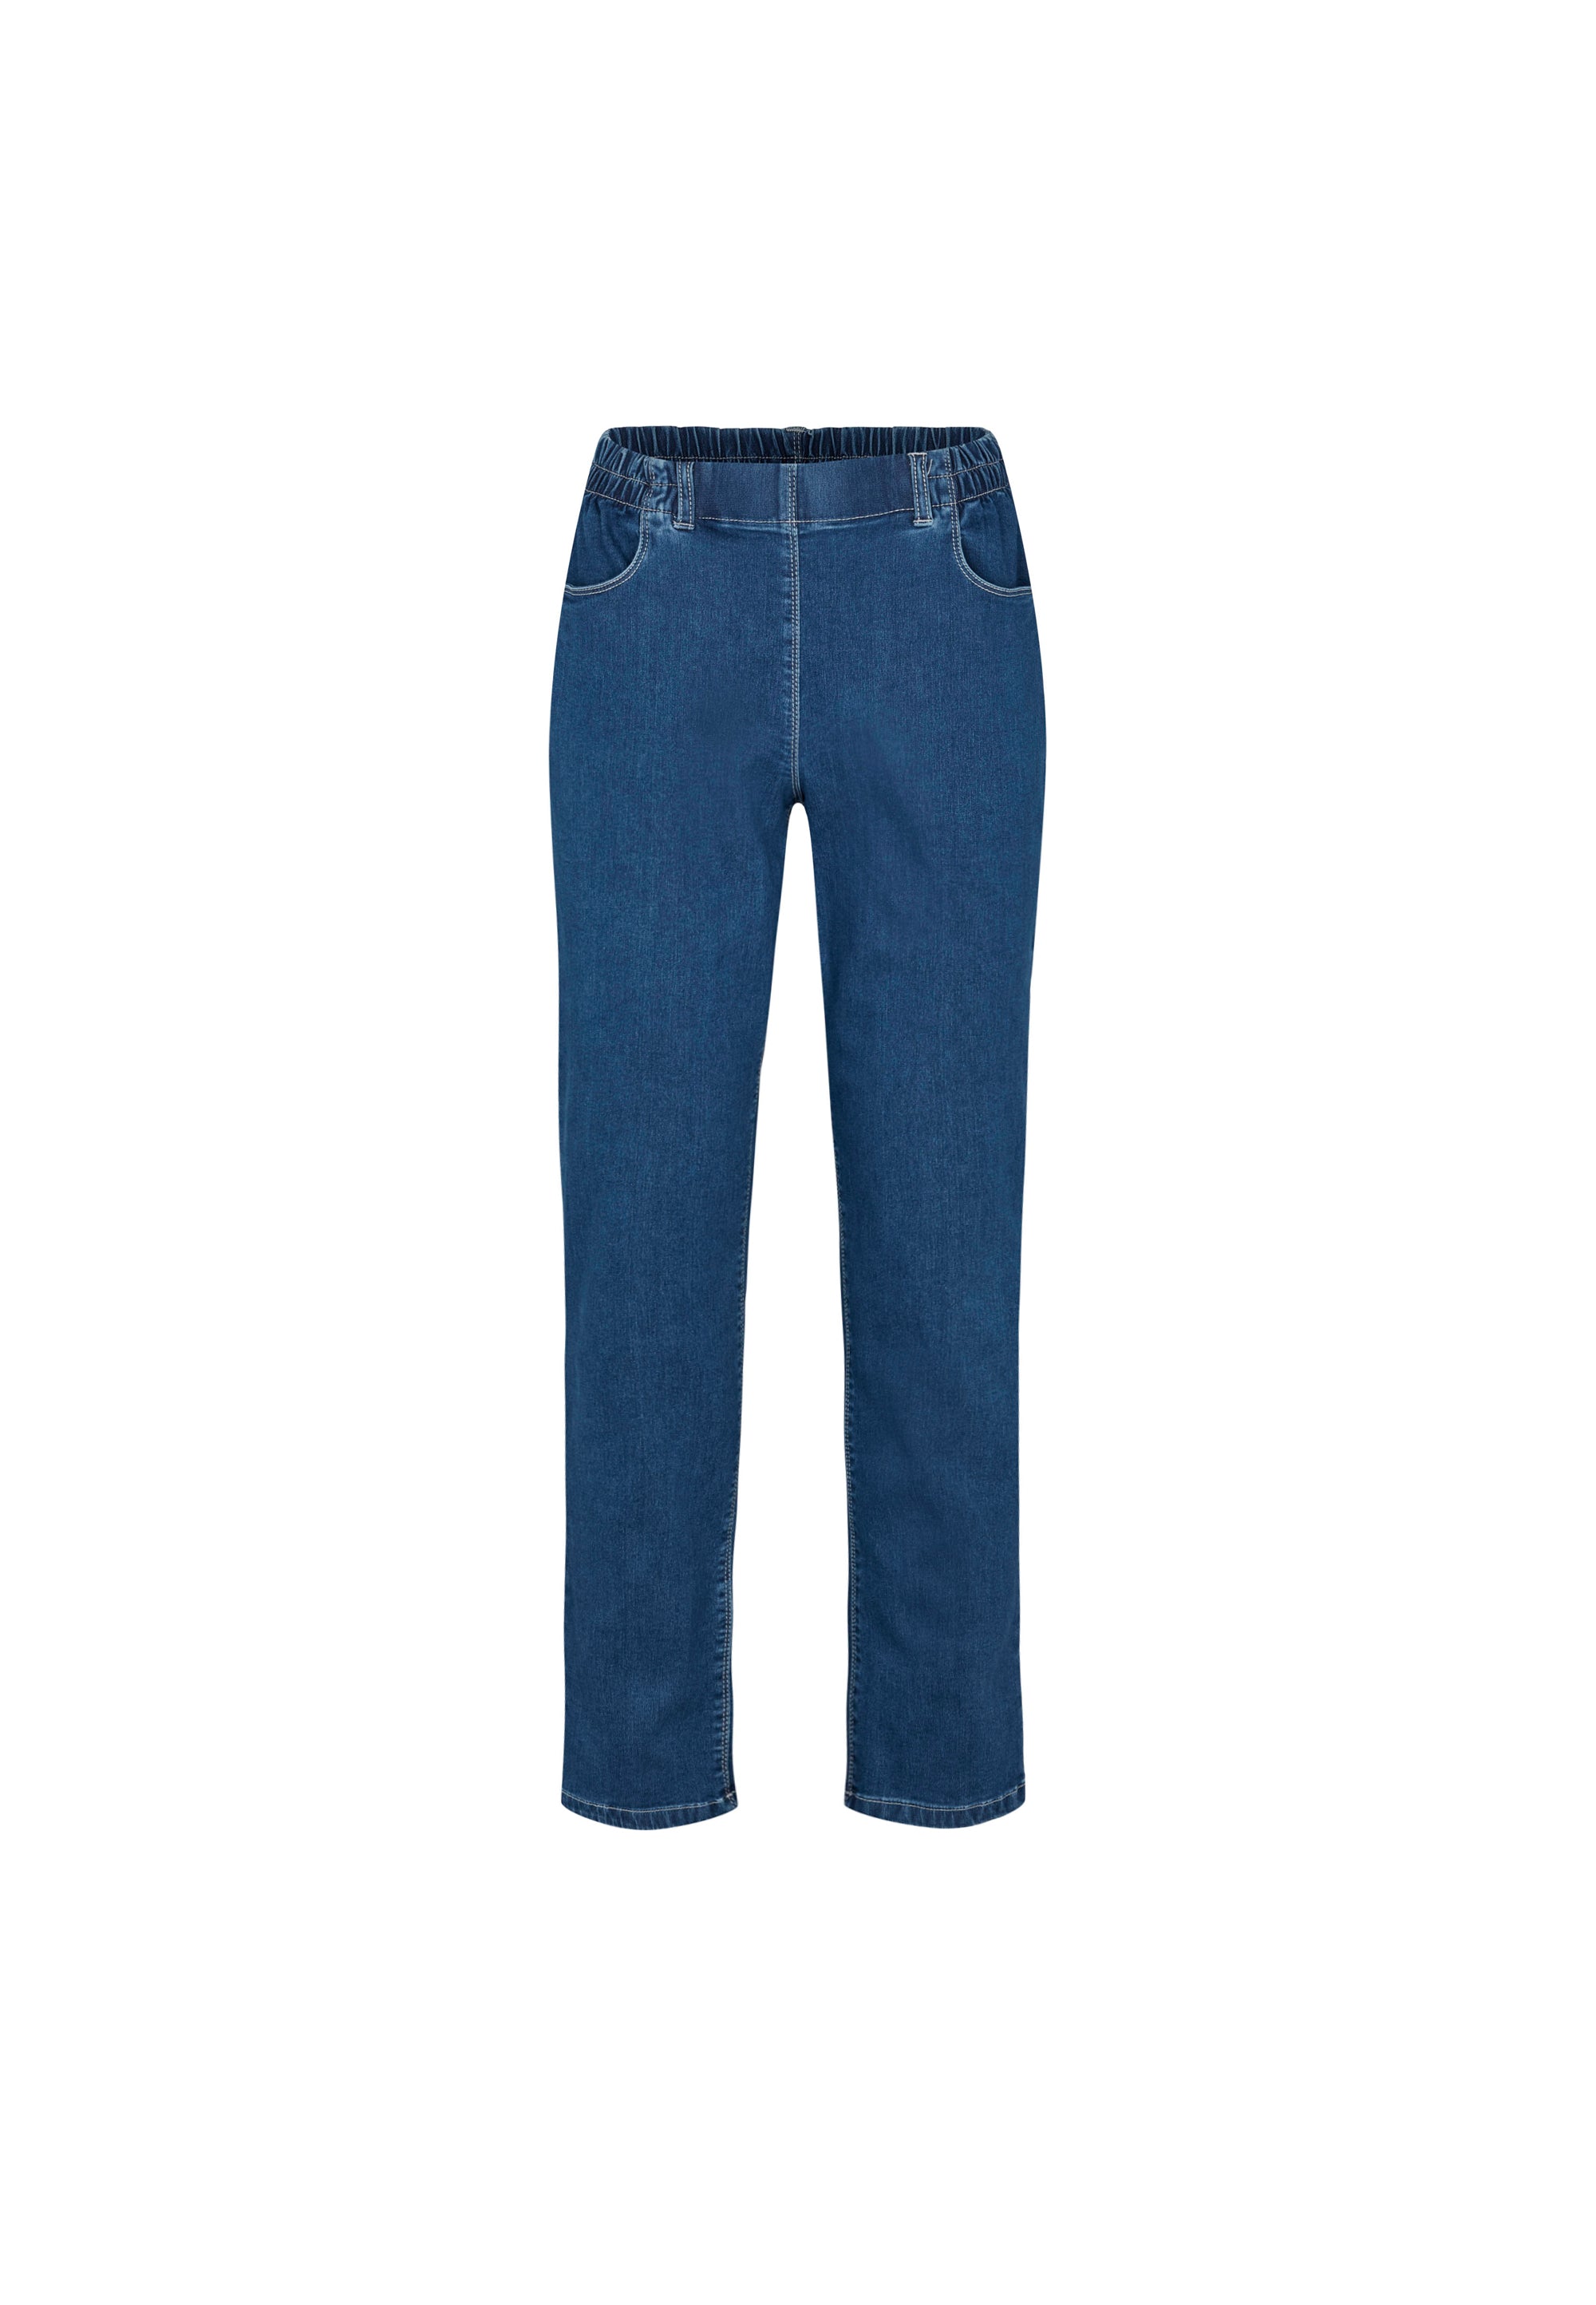 LAURIE Violet Relaxed - Medium Length Trousers RELAXED 49401 Blue Denim